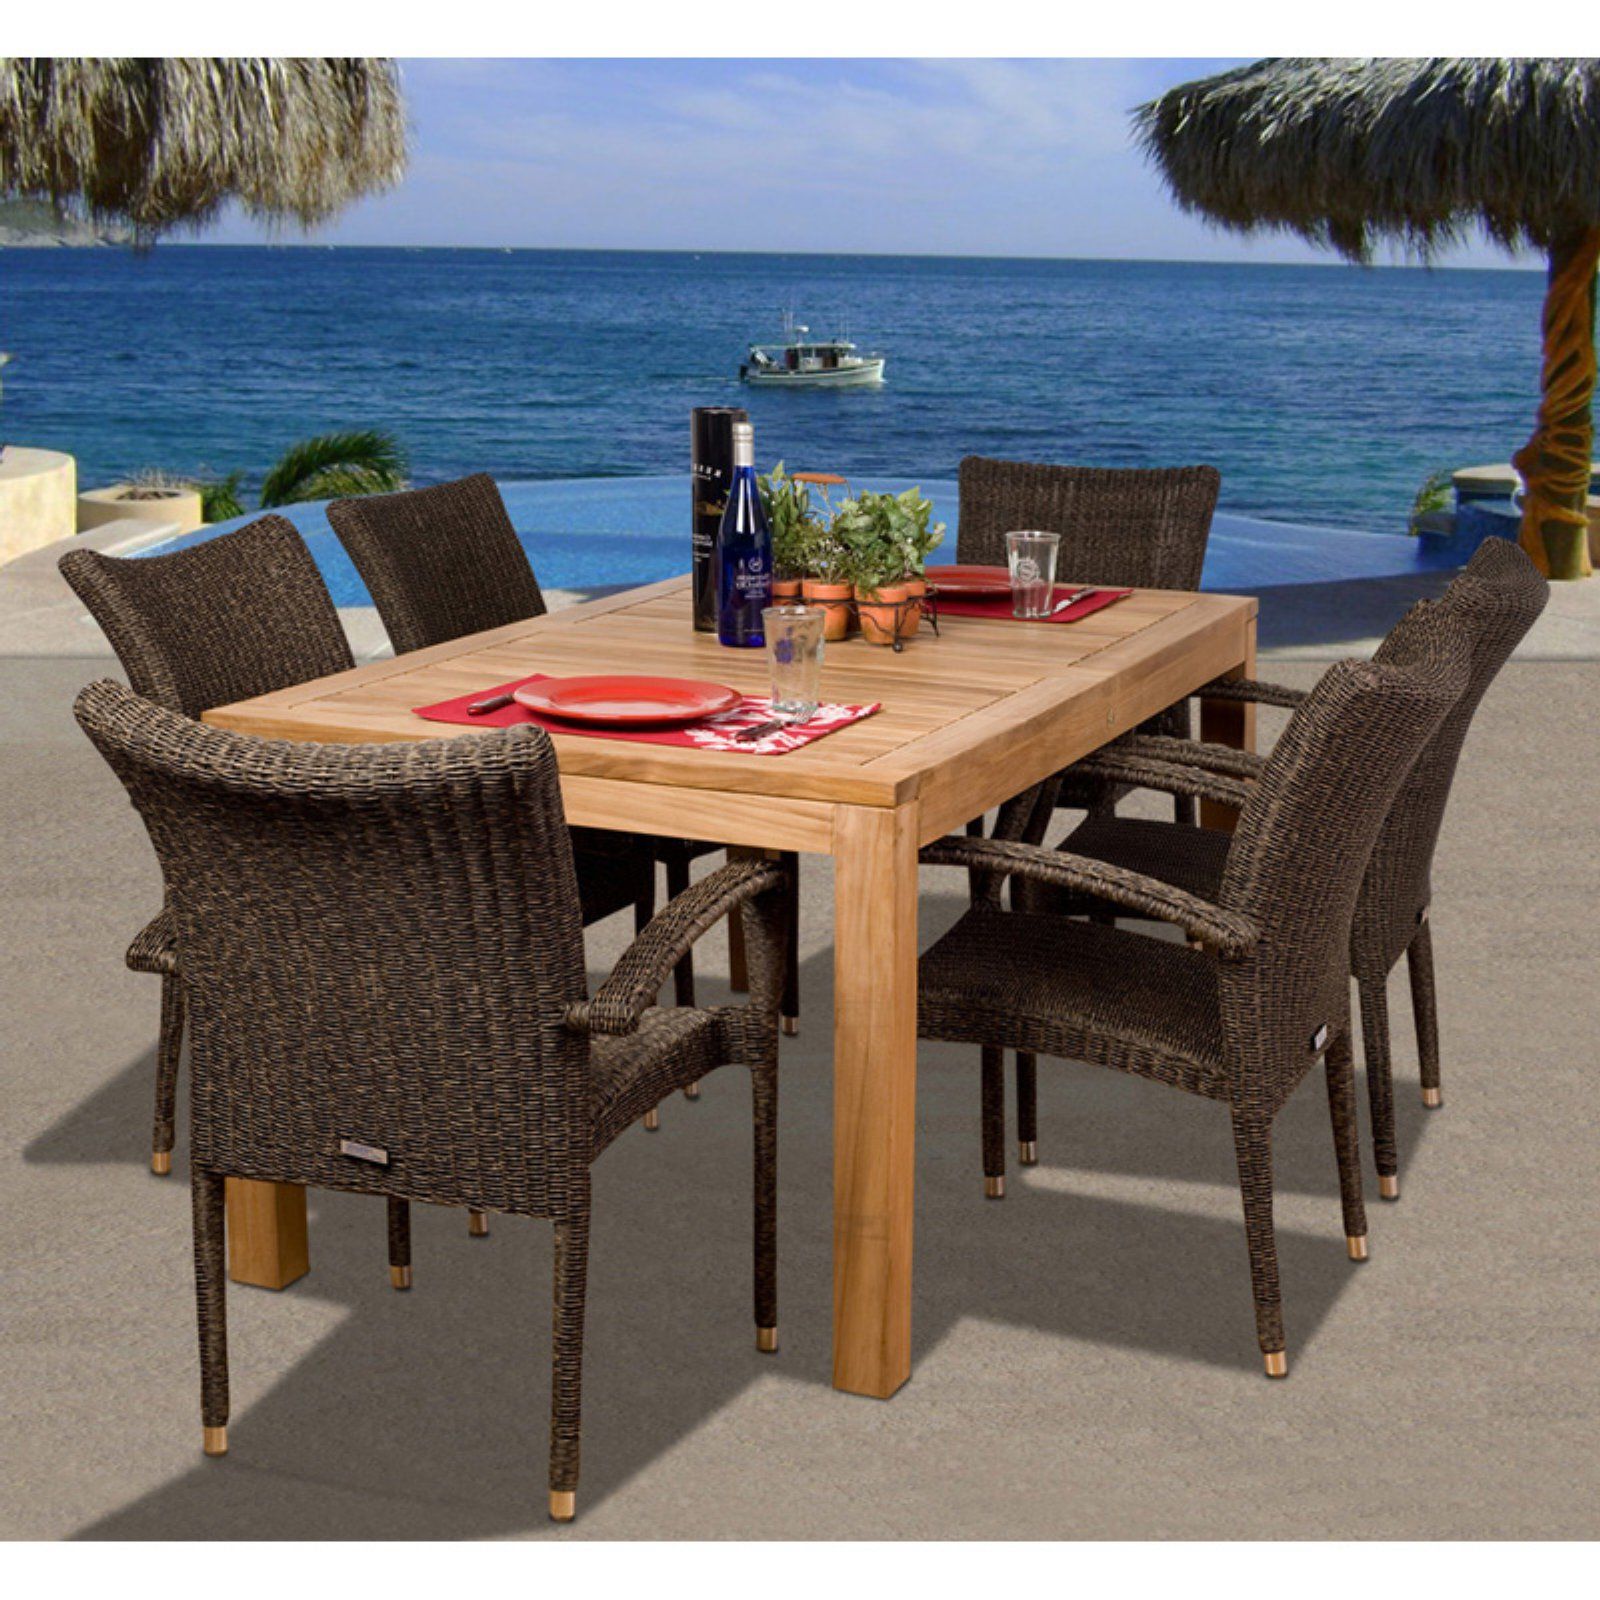 Rectangular Teak And Eucalyptus Patio Dining Sets Intended For Well Liked Outdoor Amazonia Brussels Teak Dining Set – Seats  (View 5 of 15)